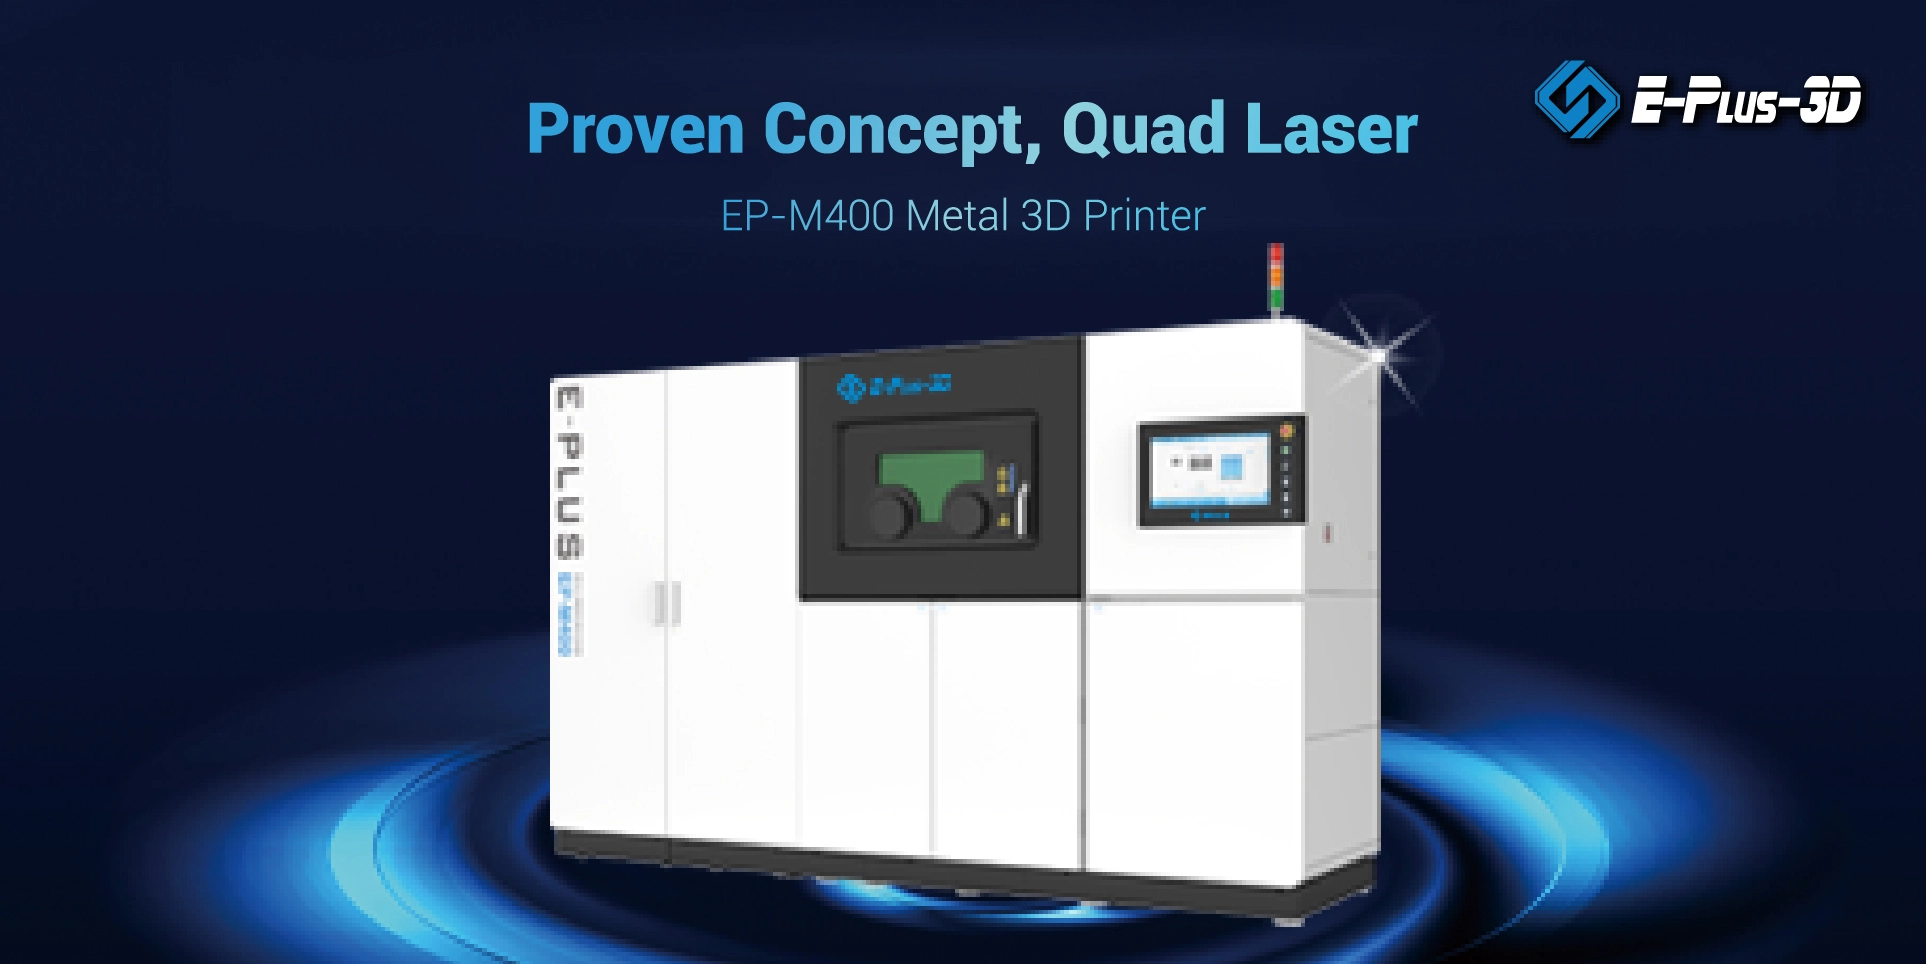 Eplus3D Launched Its New Quad-Laser Metal Powder Bed Fusion Machine EP-M400 to Achieve Higher Throughput and Cost-Efficient